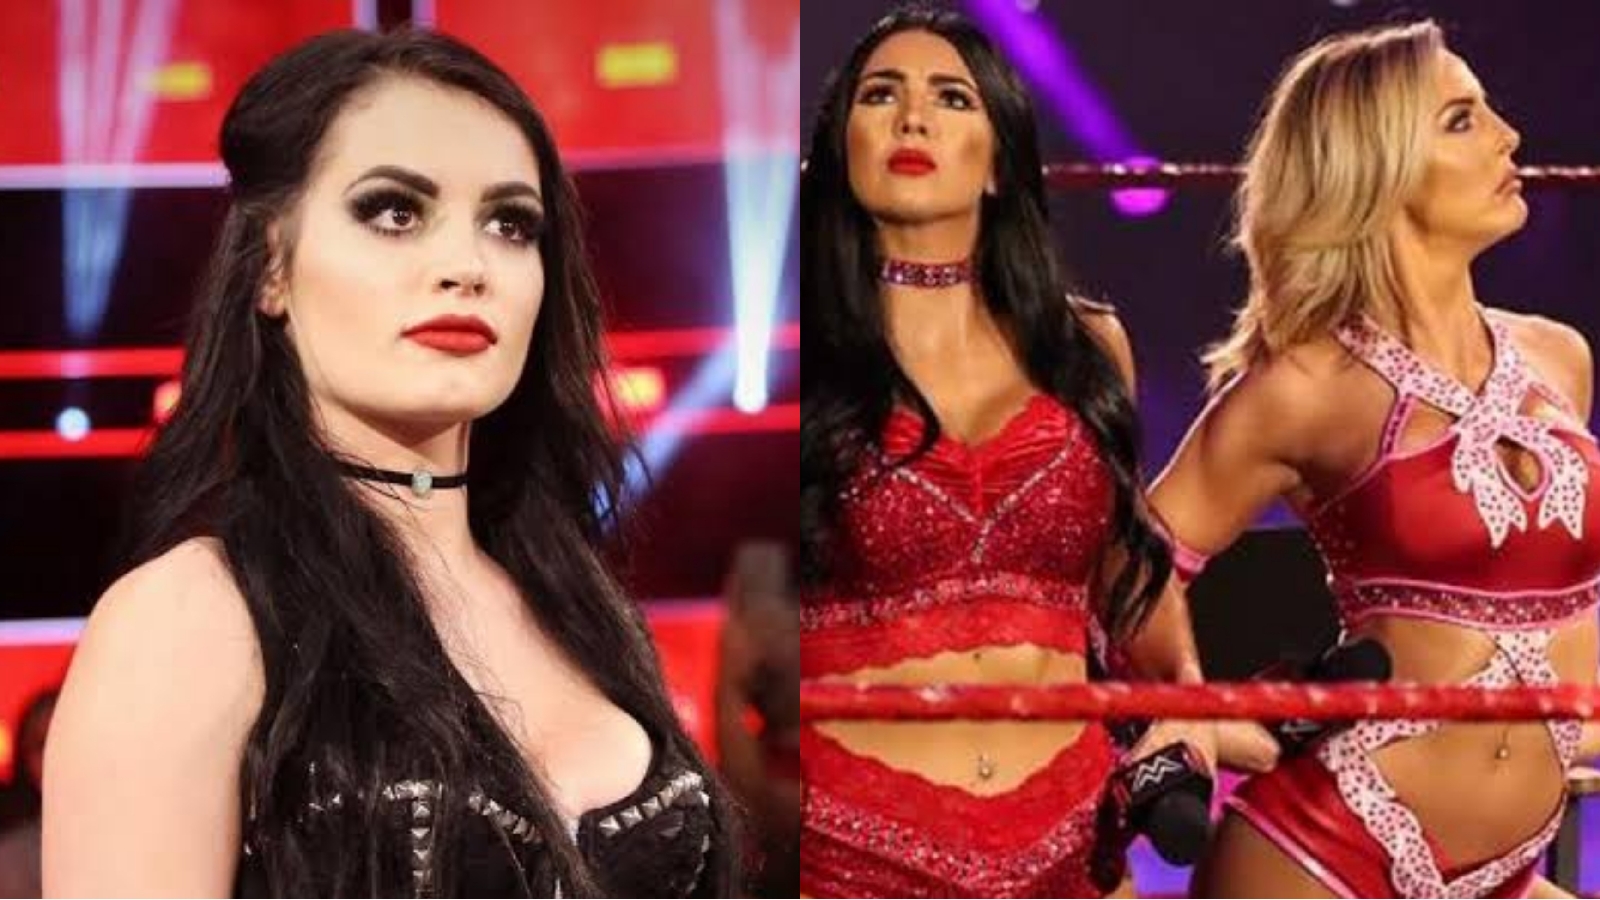 Paige Responds After Peyton Royce And Billie Kay Wwe Release